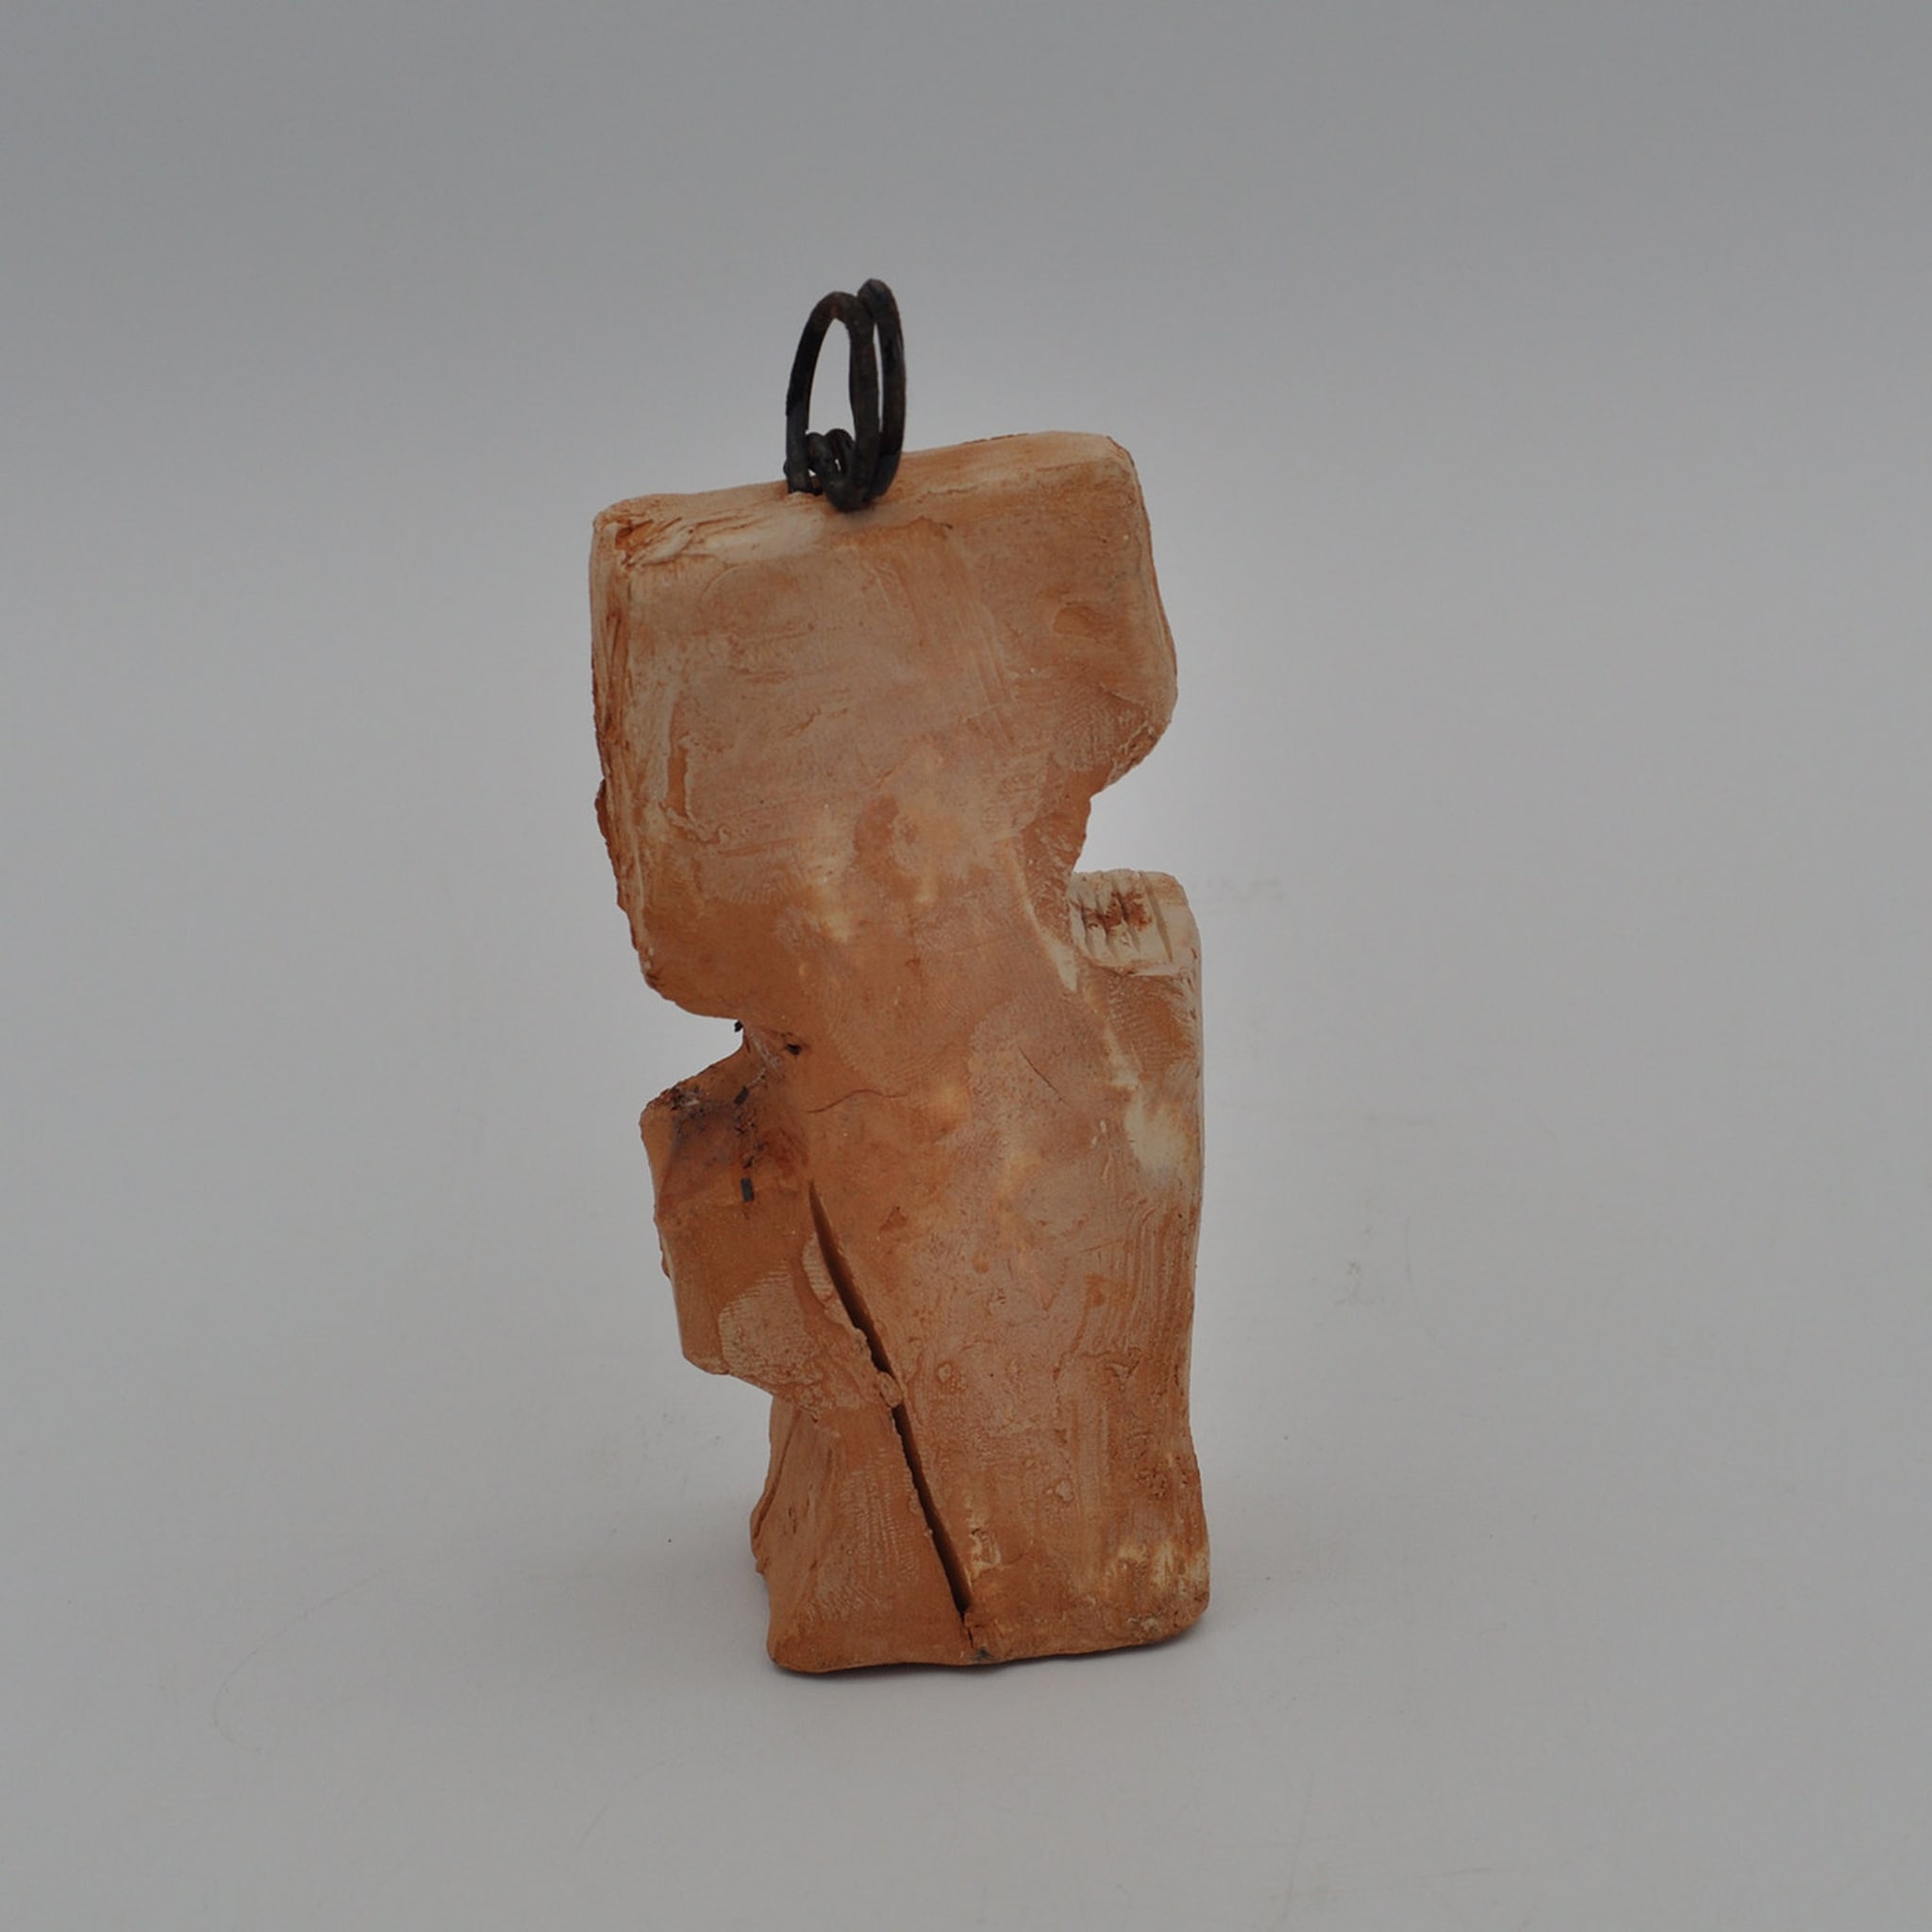 White and Red Clay Sculpture with Metal Insert - Alternative view 2